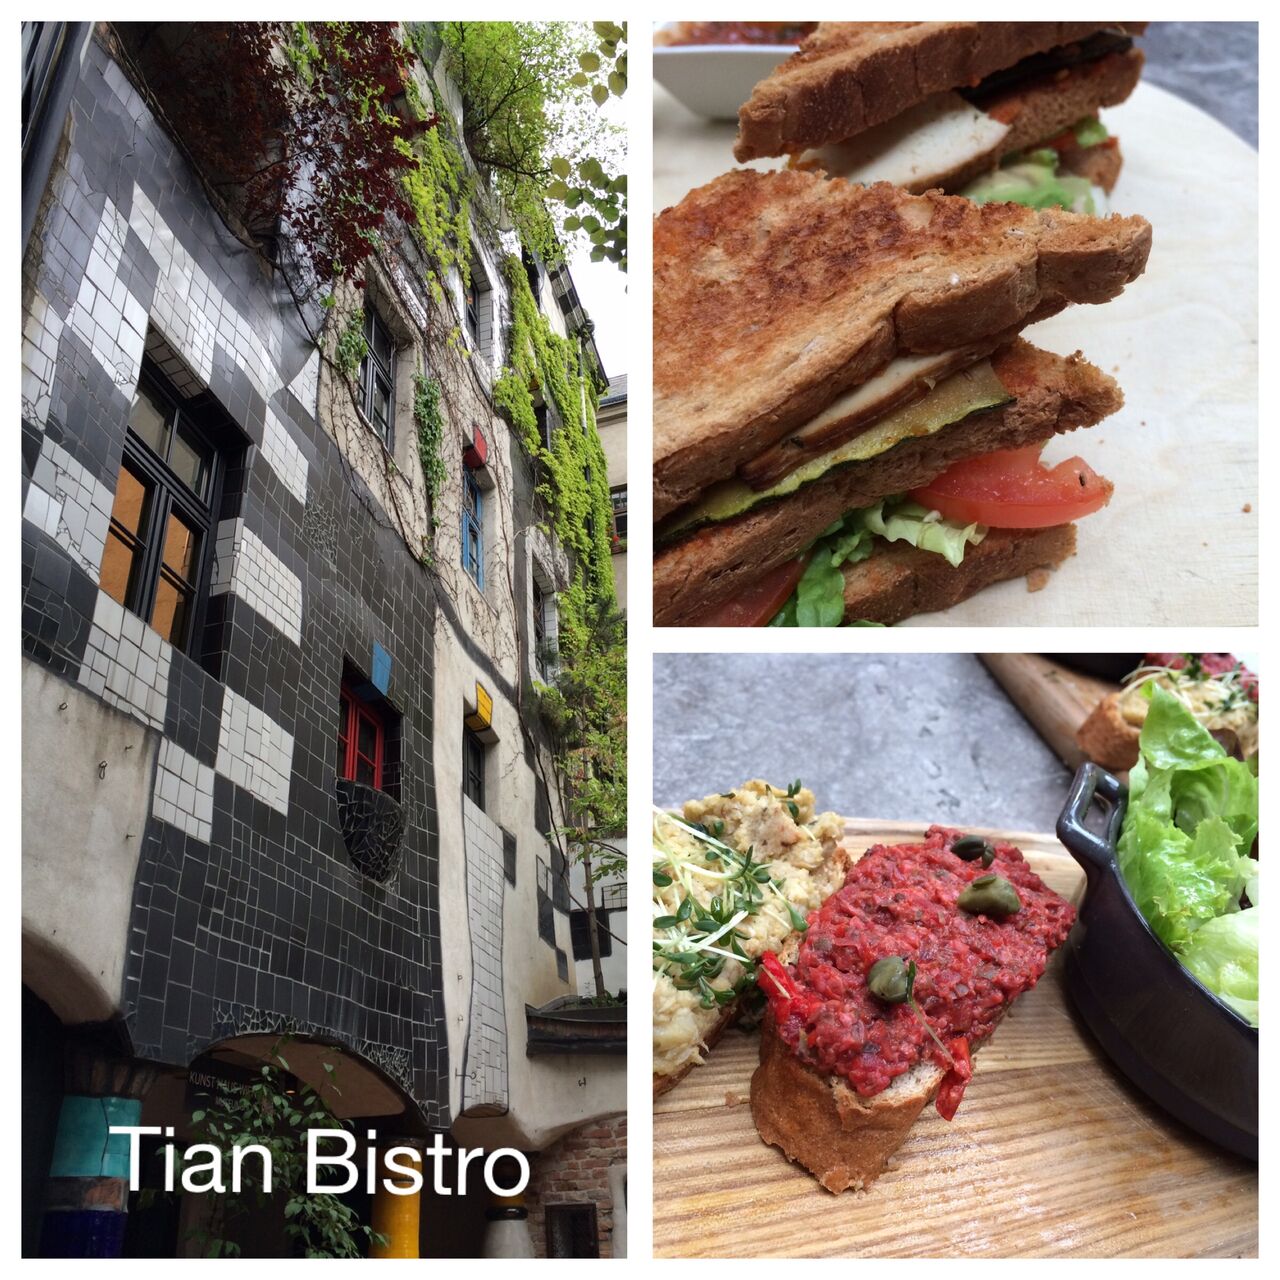 A photo of Tian Bistro